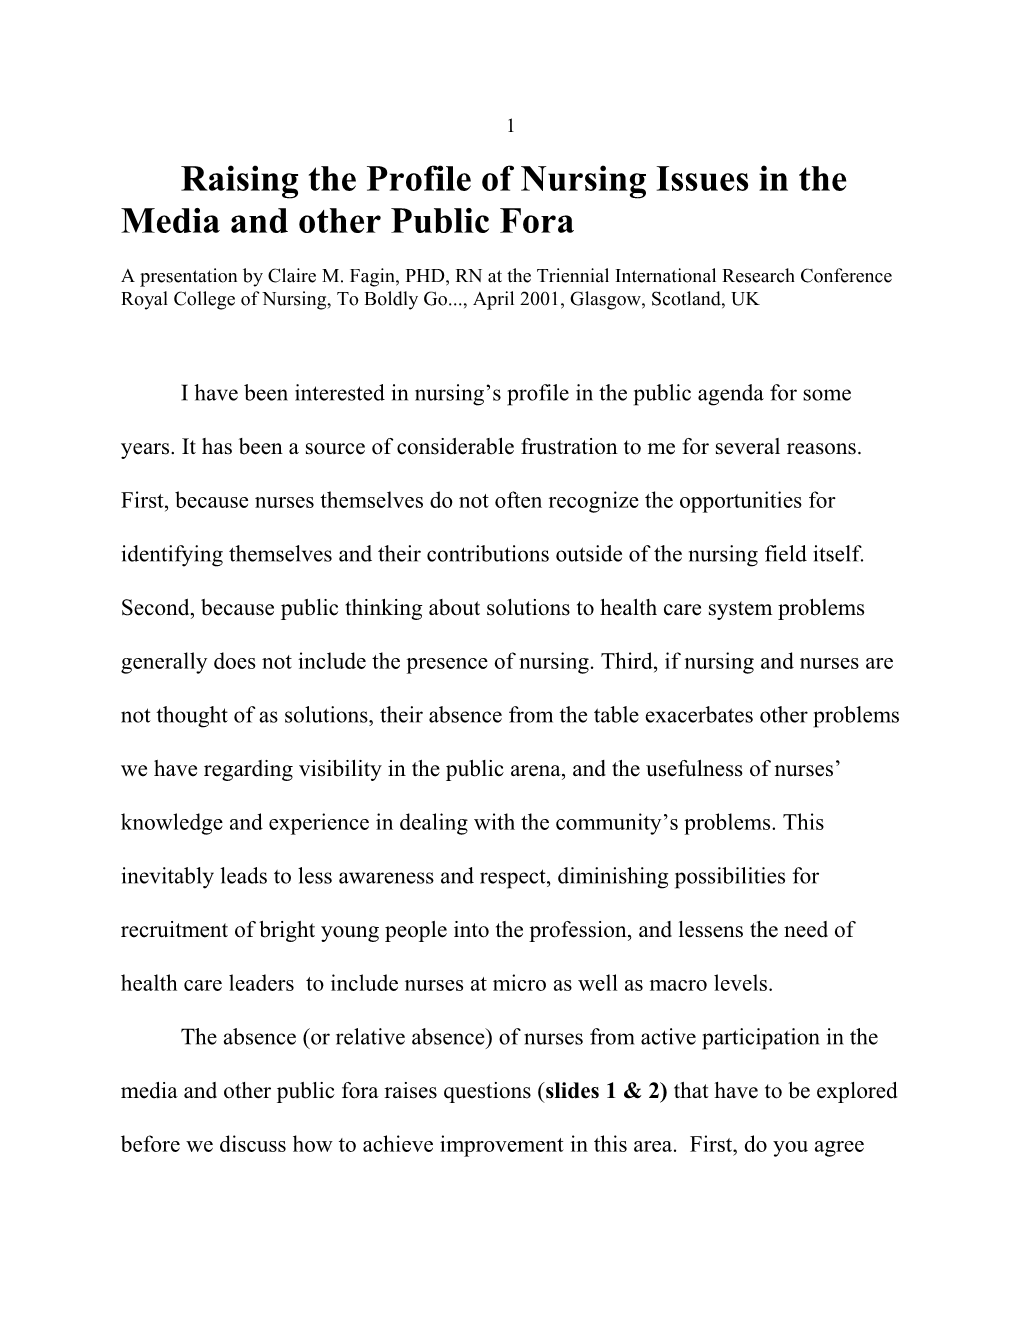 Raising the Profile of Nursing Issues in the Media and Other Public Fora